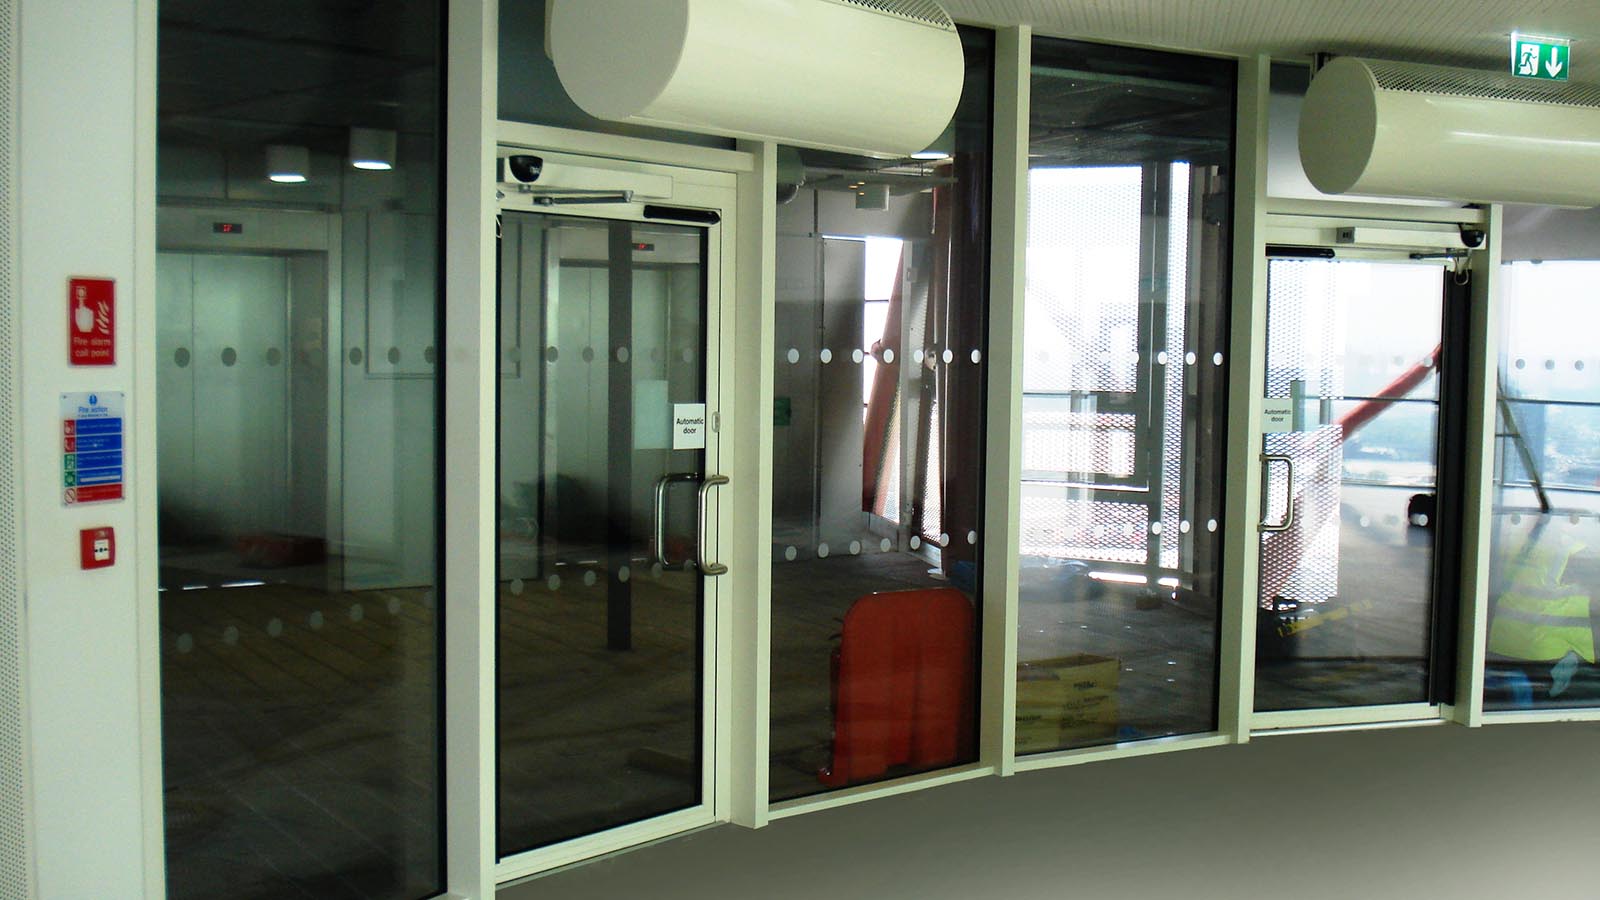 Wrightstyle-Olympic-Orbit-Tower-CW-and-Fire-Doors